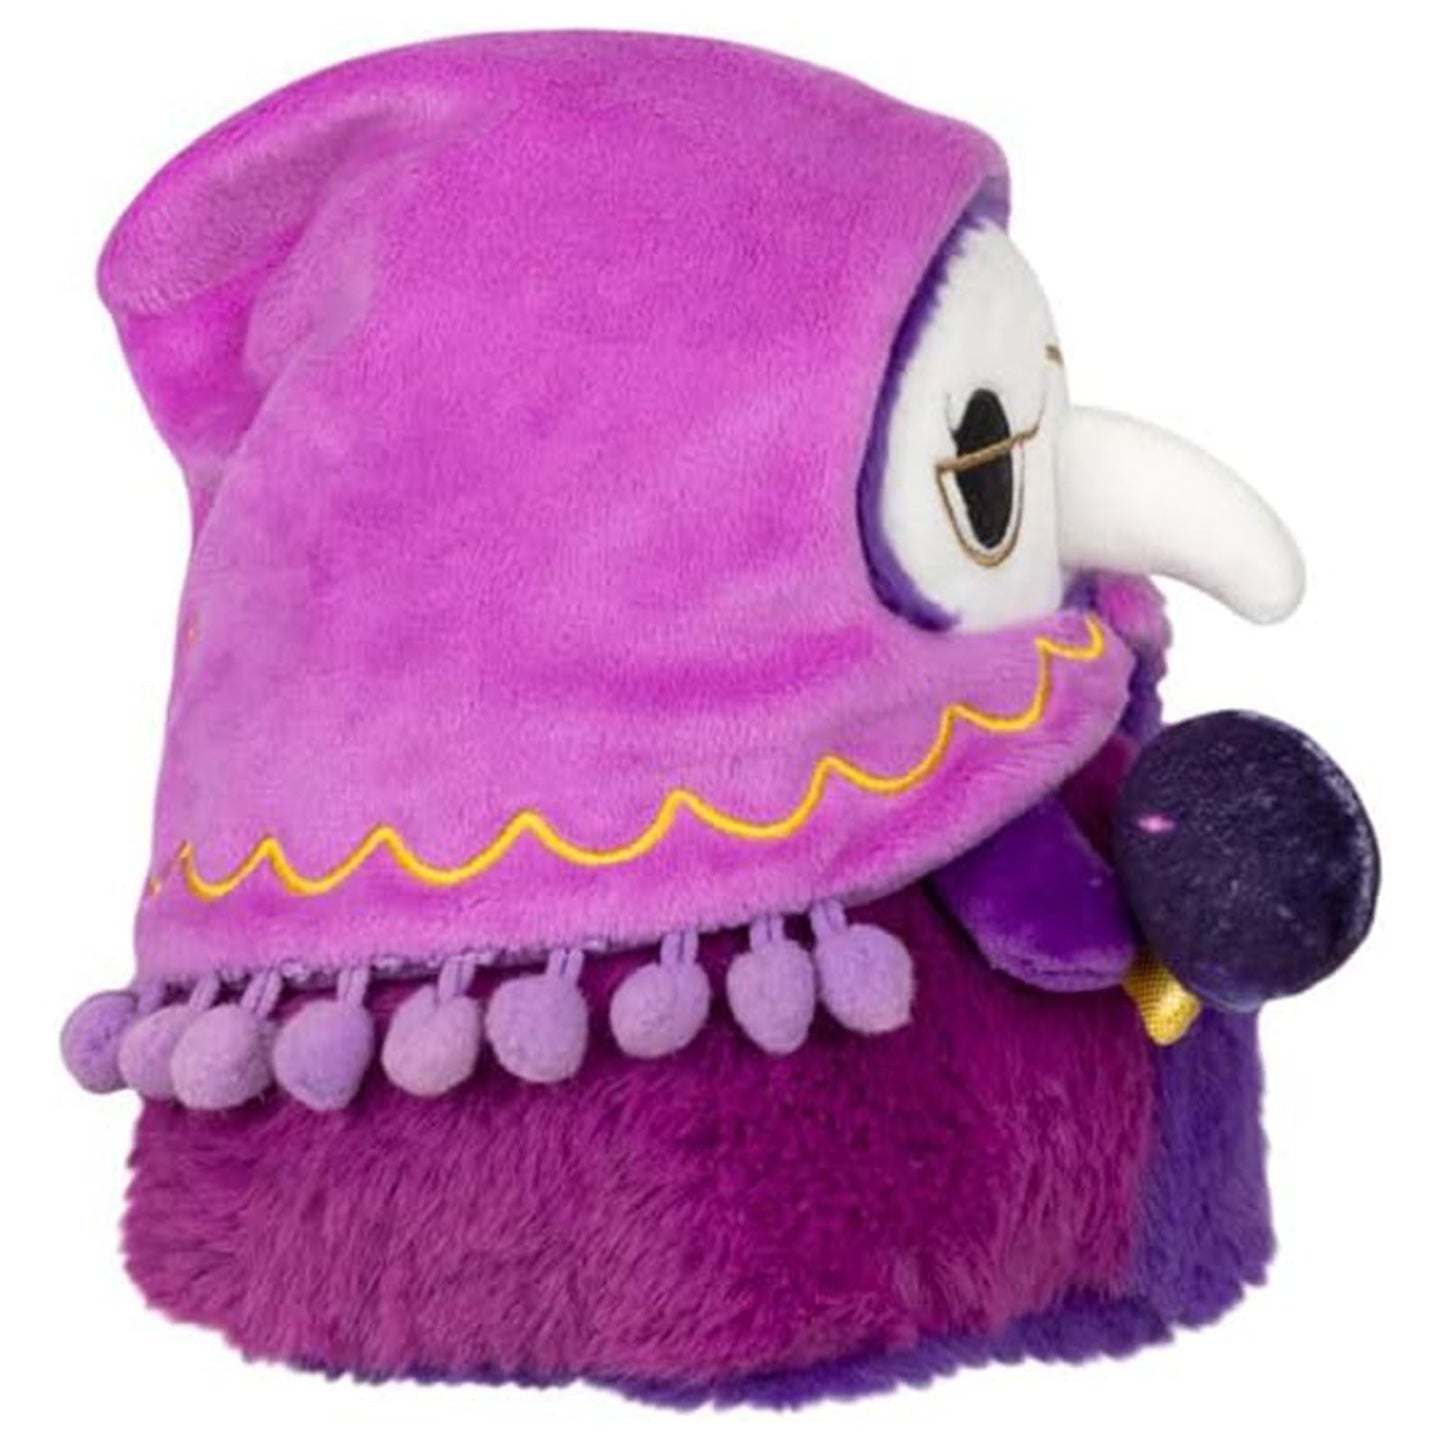 Squishable Alter Ego Plague Doctor Fortune Teller 6 Inch Plush